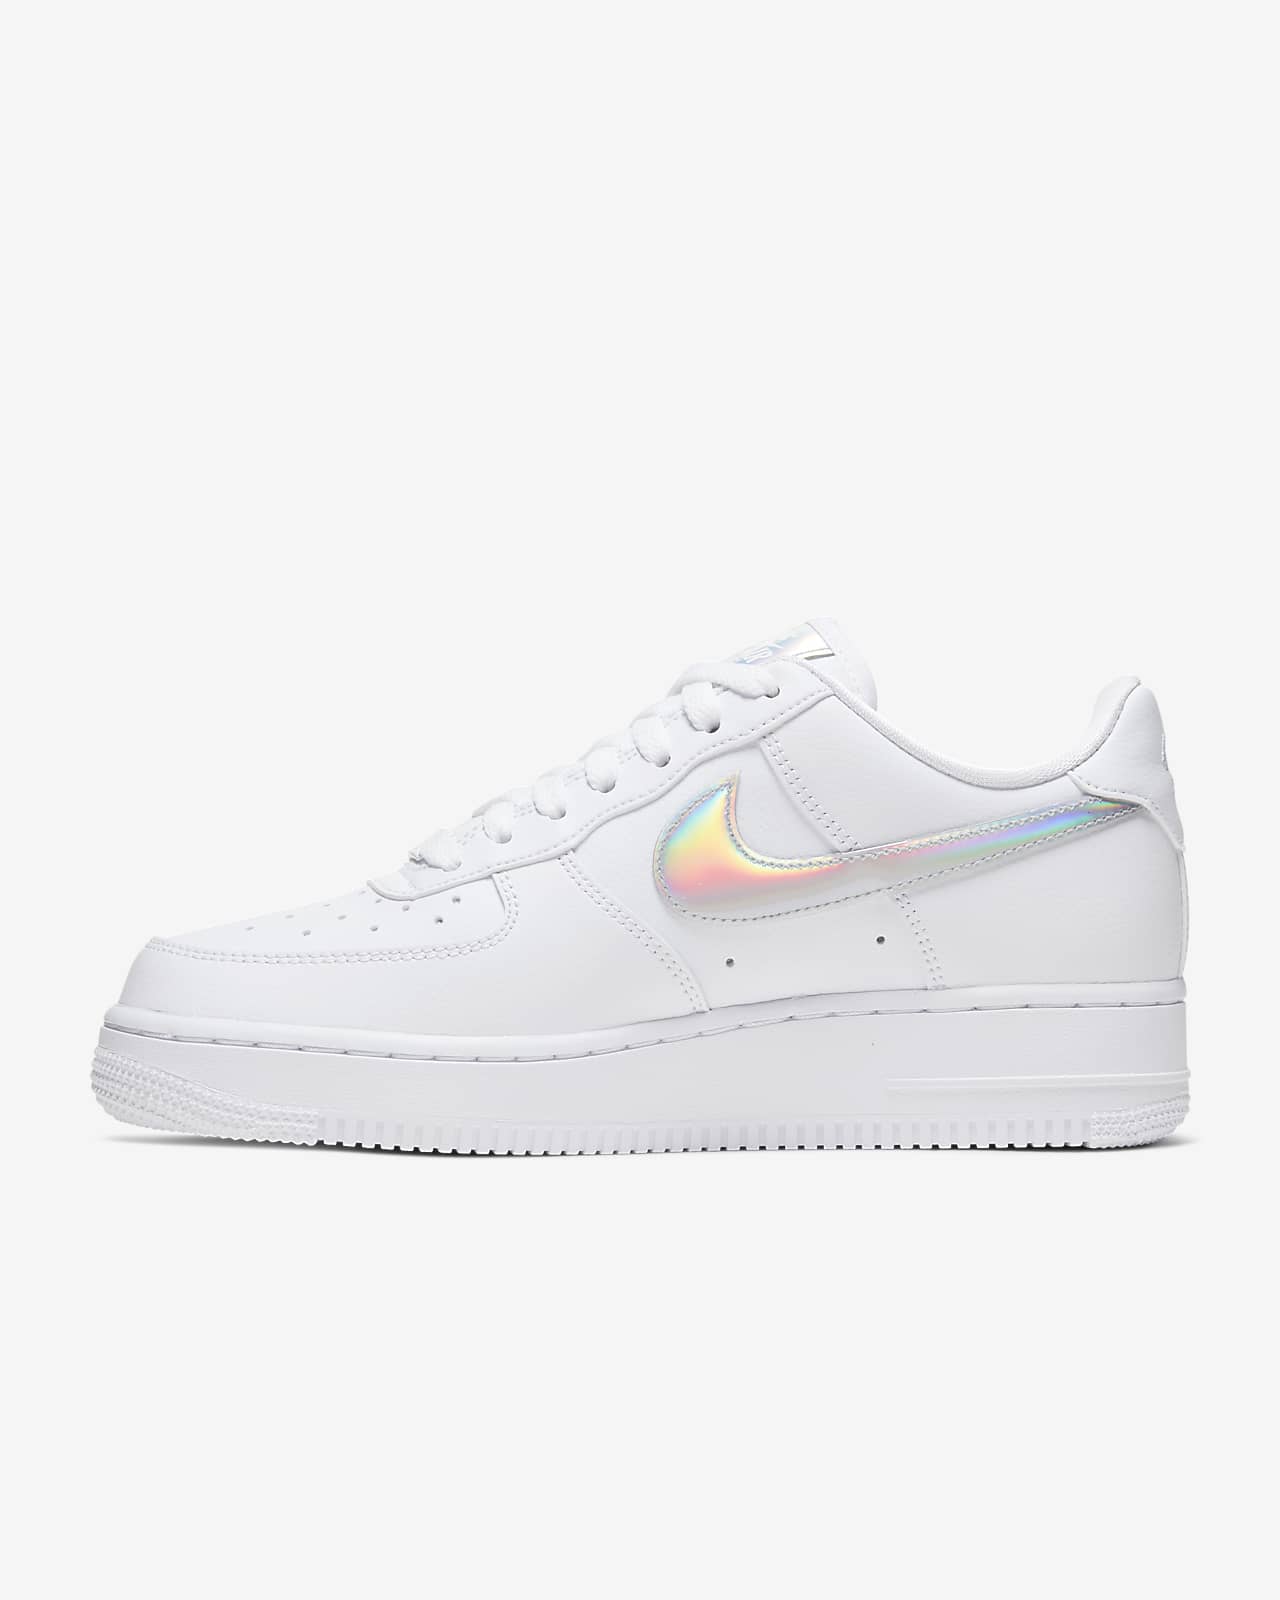 nike air force one size 9